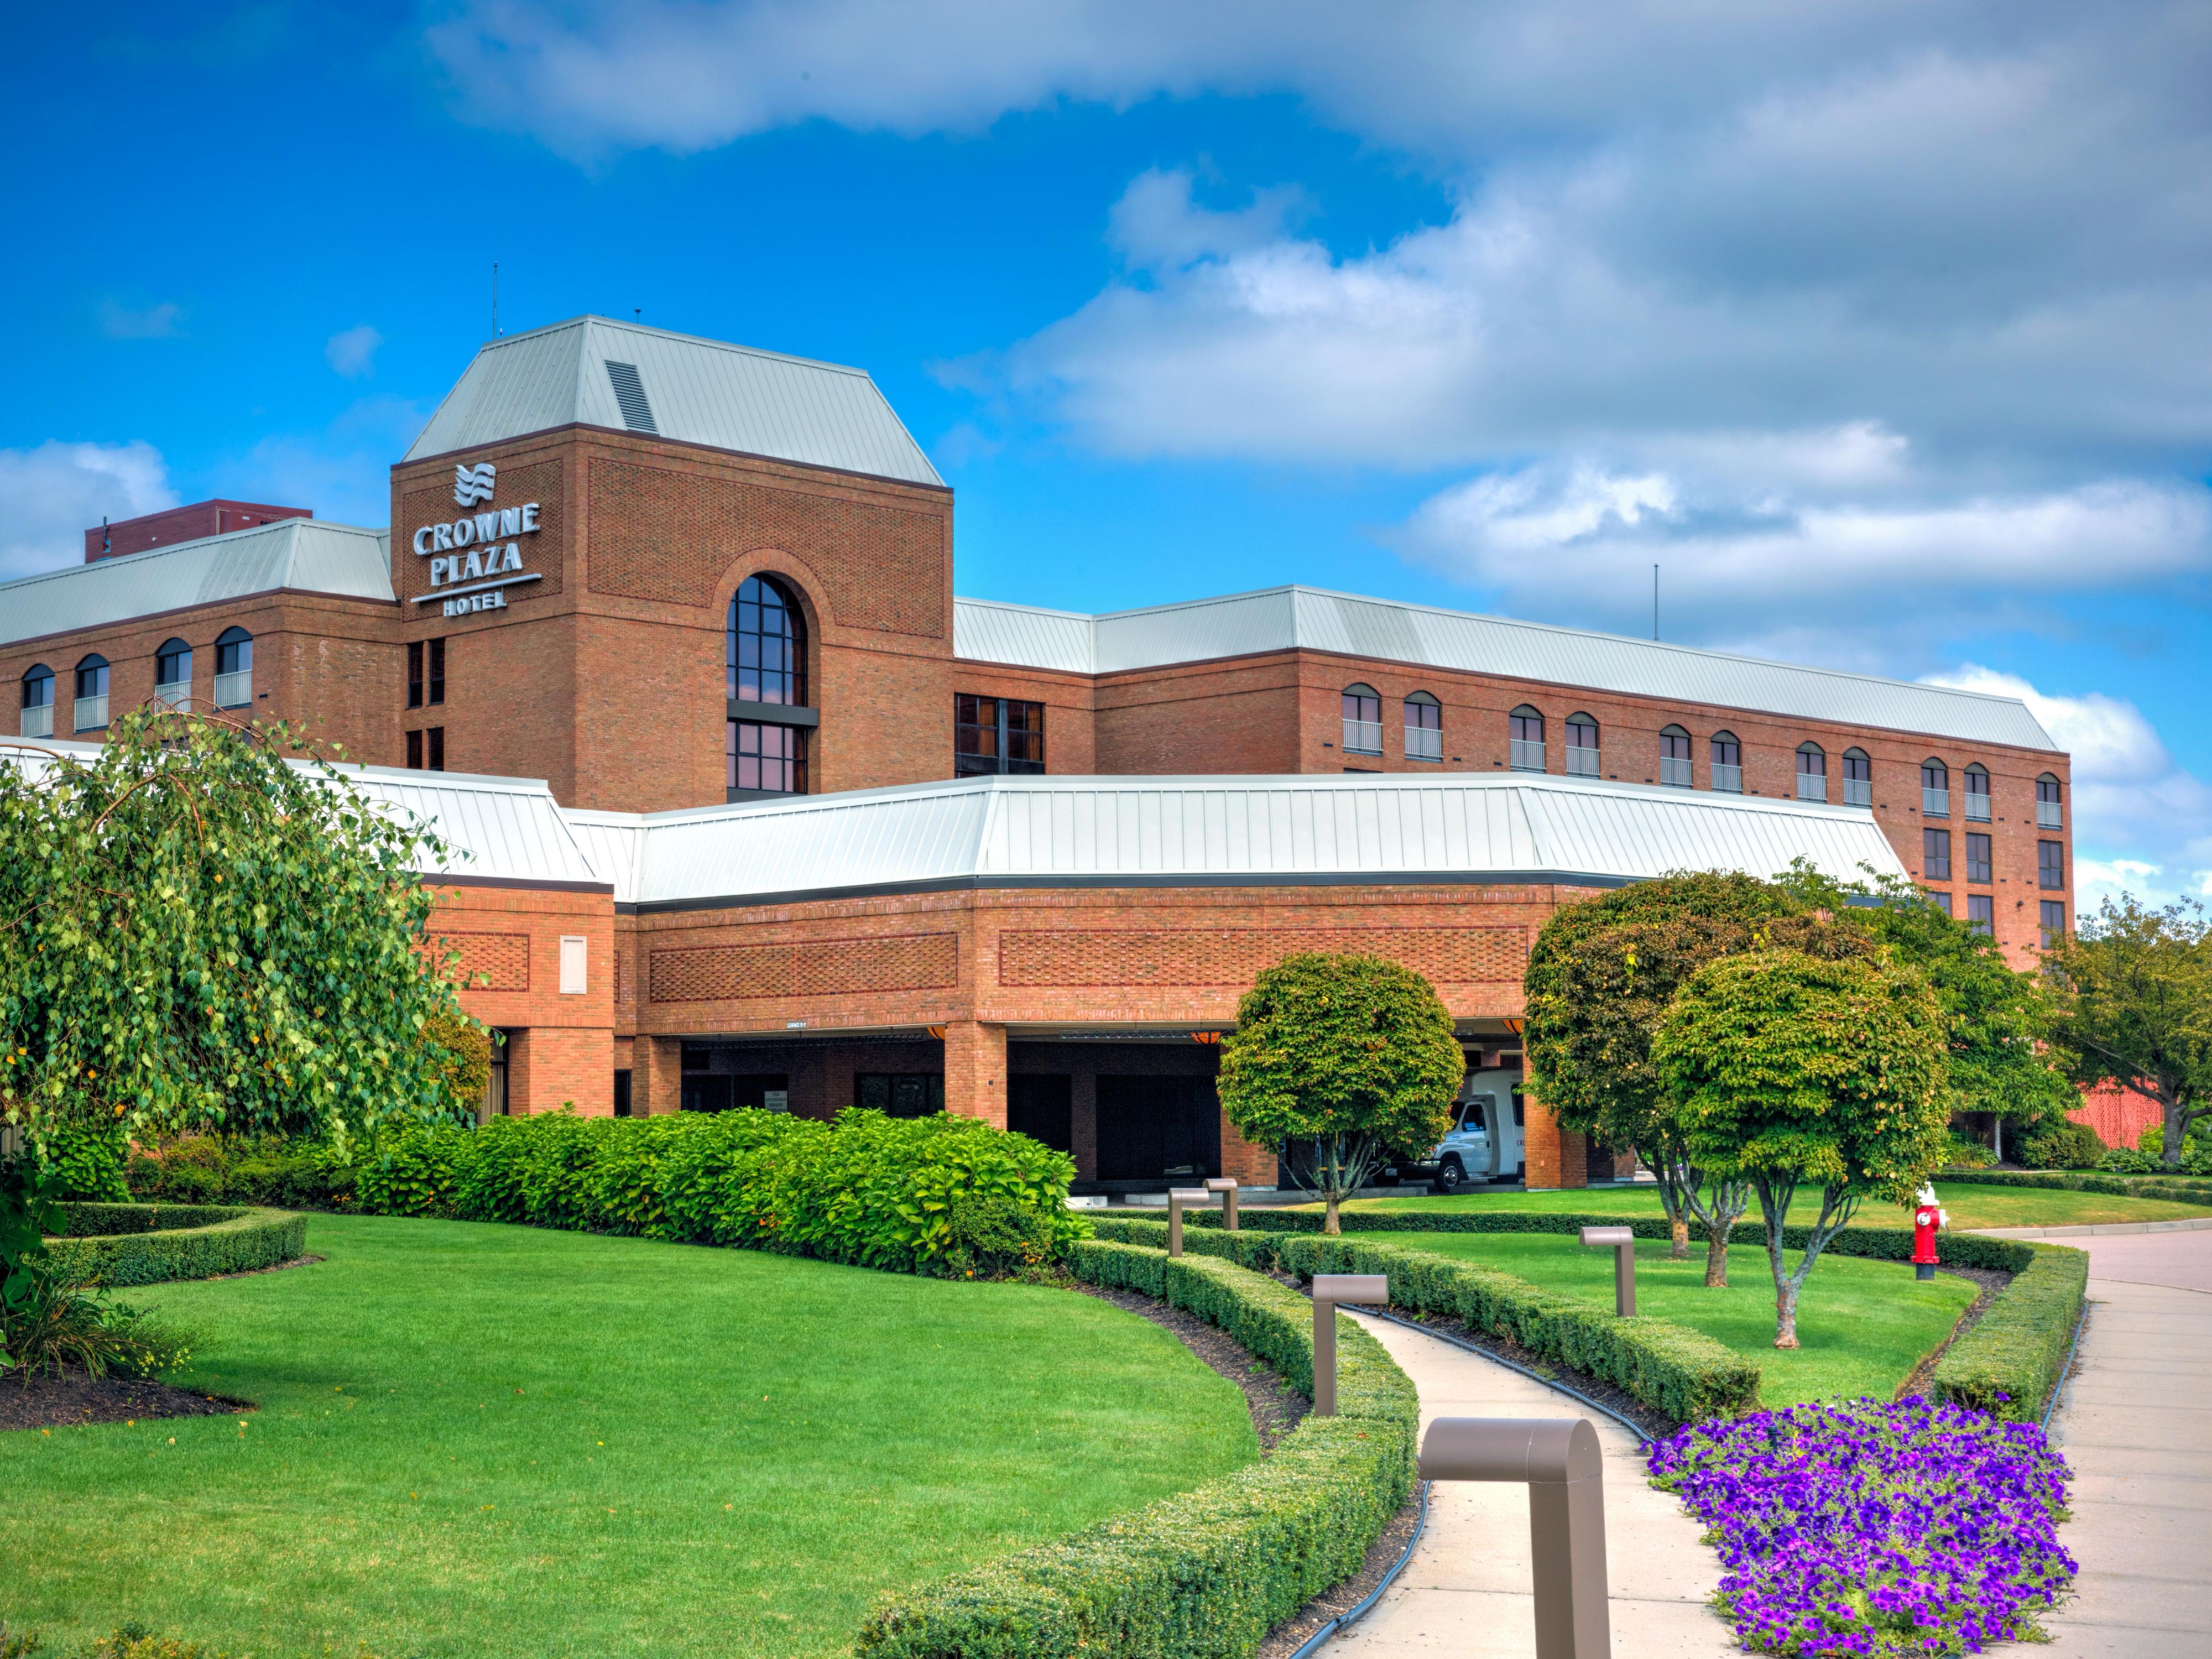 Crowne Plaza® Providence-Warwick (Airport) is centrally located and is close to Newport, Providence, and Rhode Island's stunning beaches. Whether you're here for business or leisure, you'll have easy access to all the area has to offer.